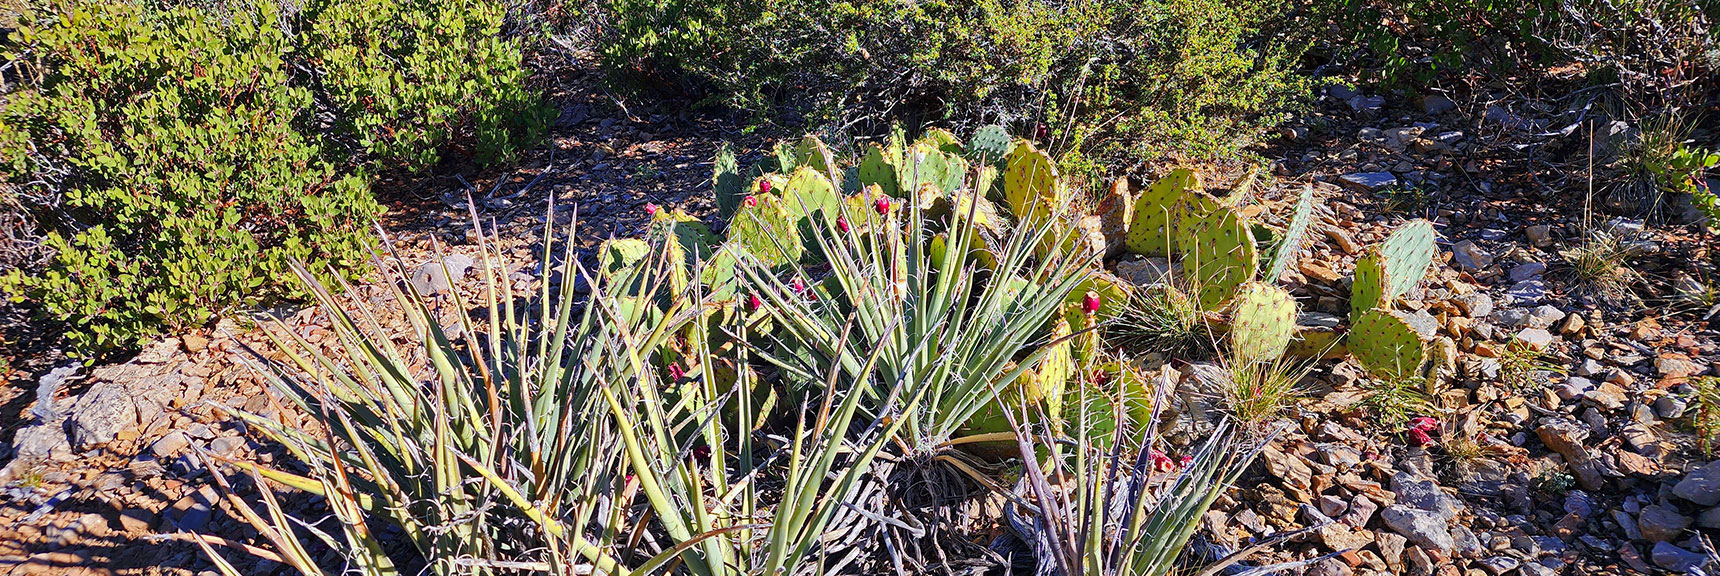 Yucca and Prickly Pear Cactus on Trail | Griffith Shadow Loop | Lovell Canyon, Nevada